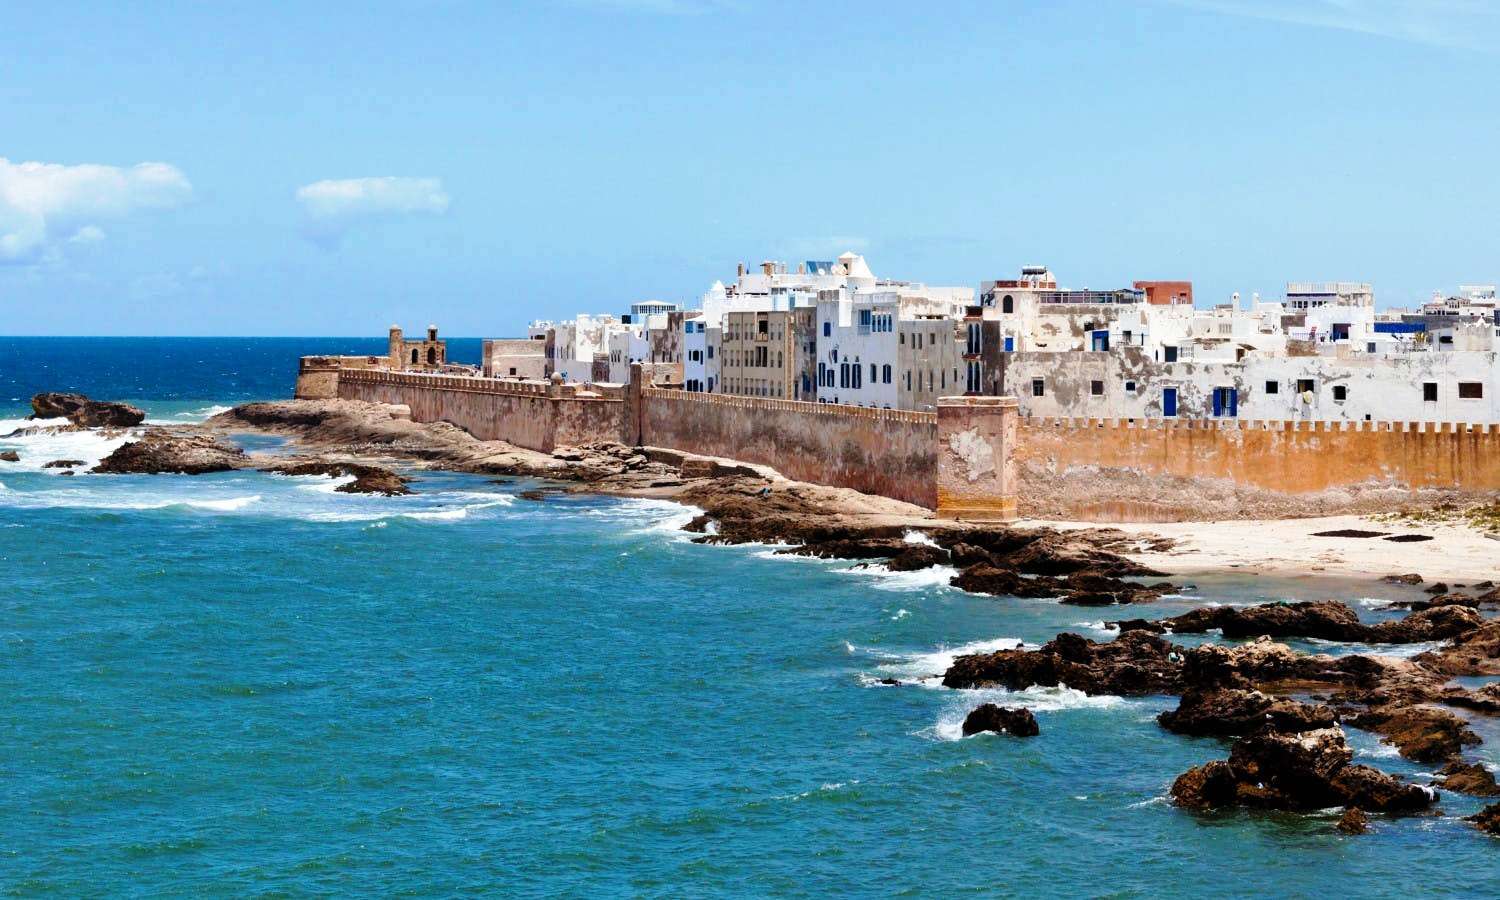 Morocco day trip to the coastal city of Essaouira from Marrakech